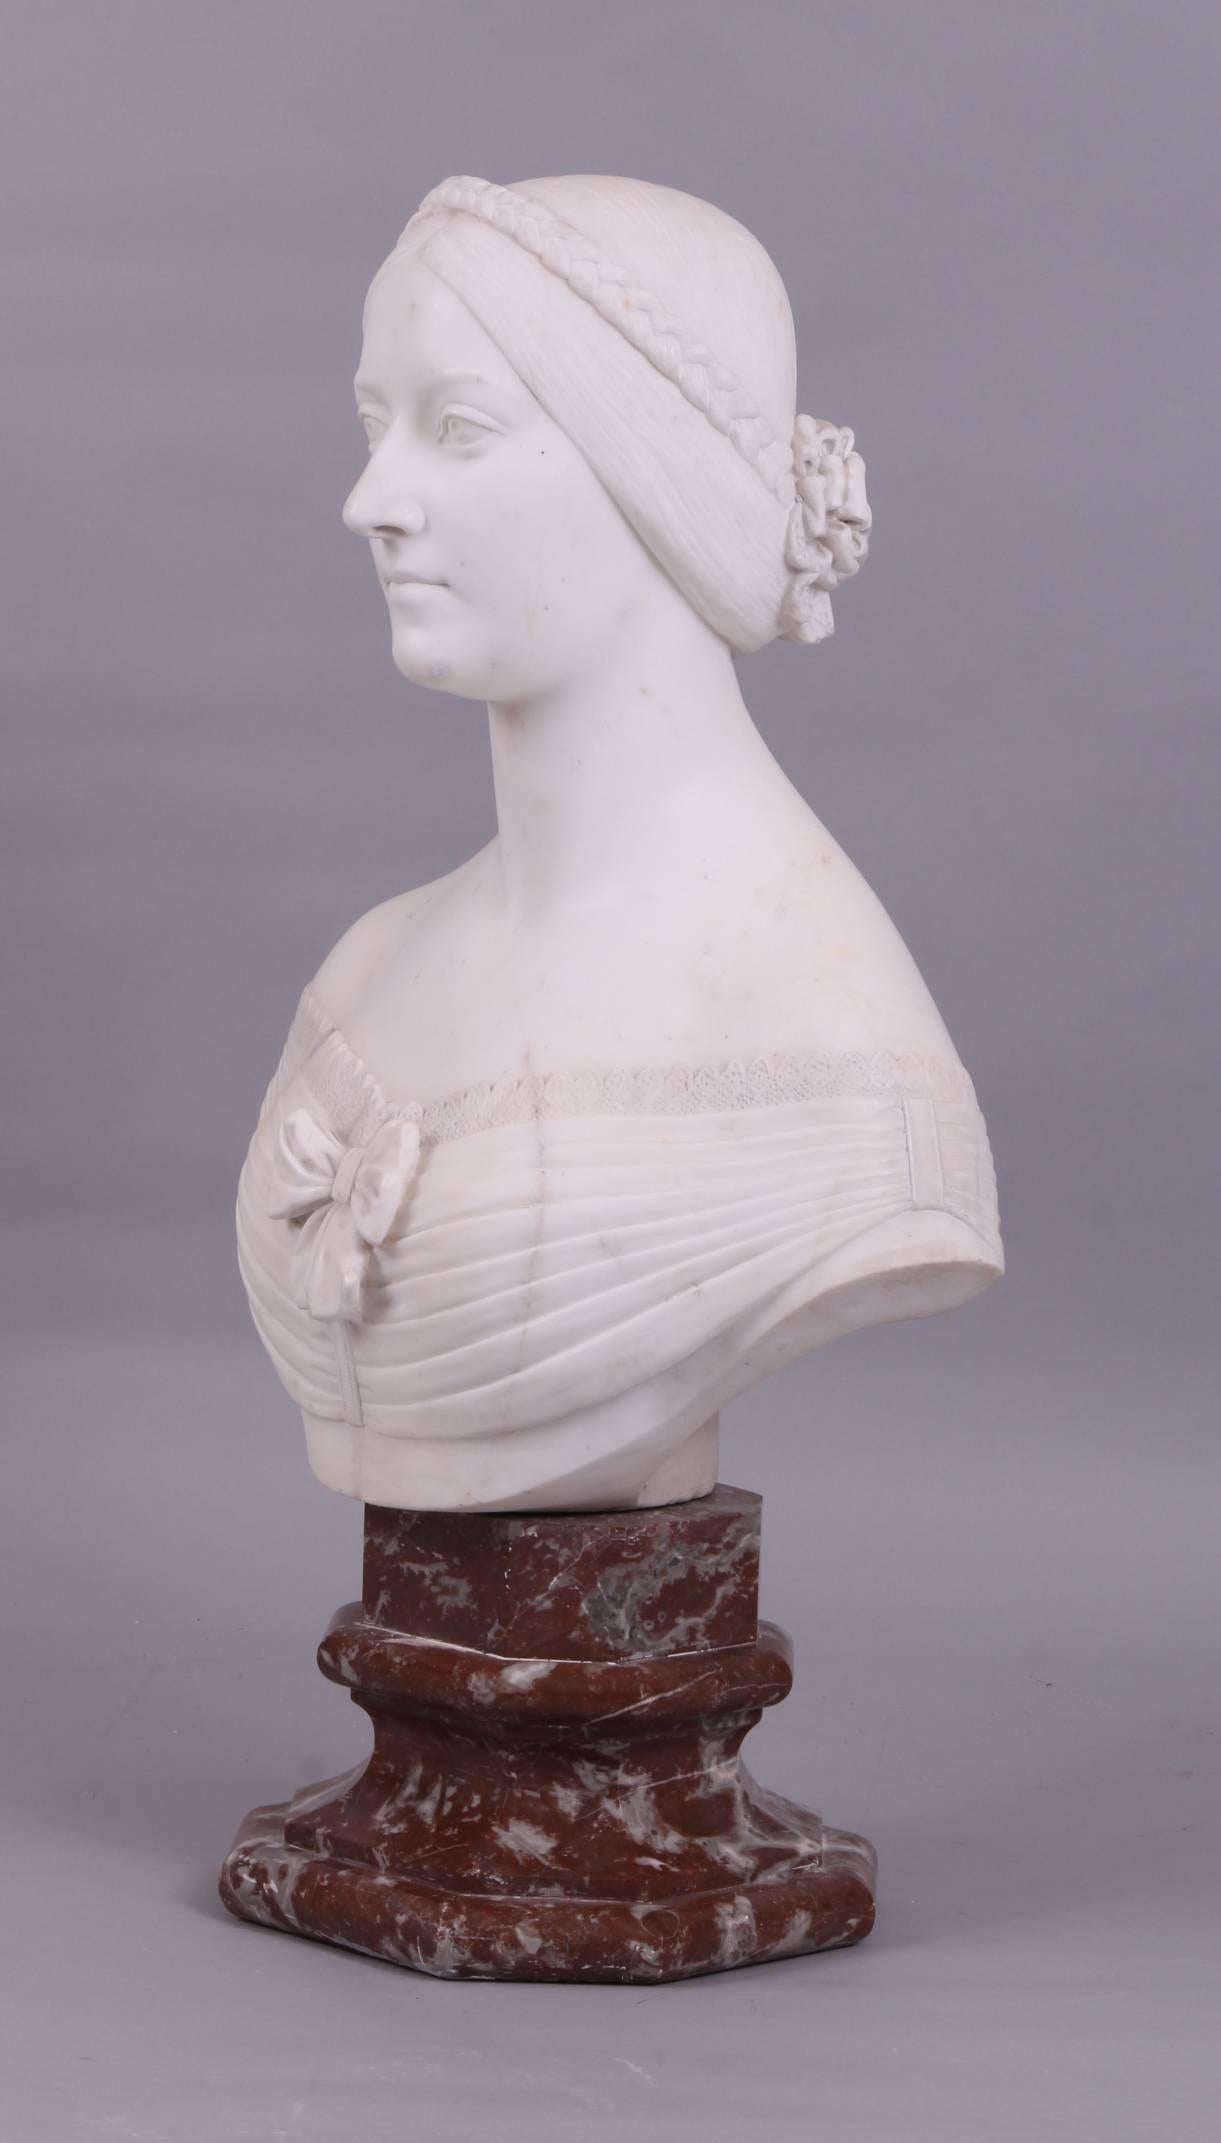 Large 19th Century Carved White Marble Classical Bust In Excellent Condition In London, by appointment only